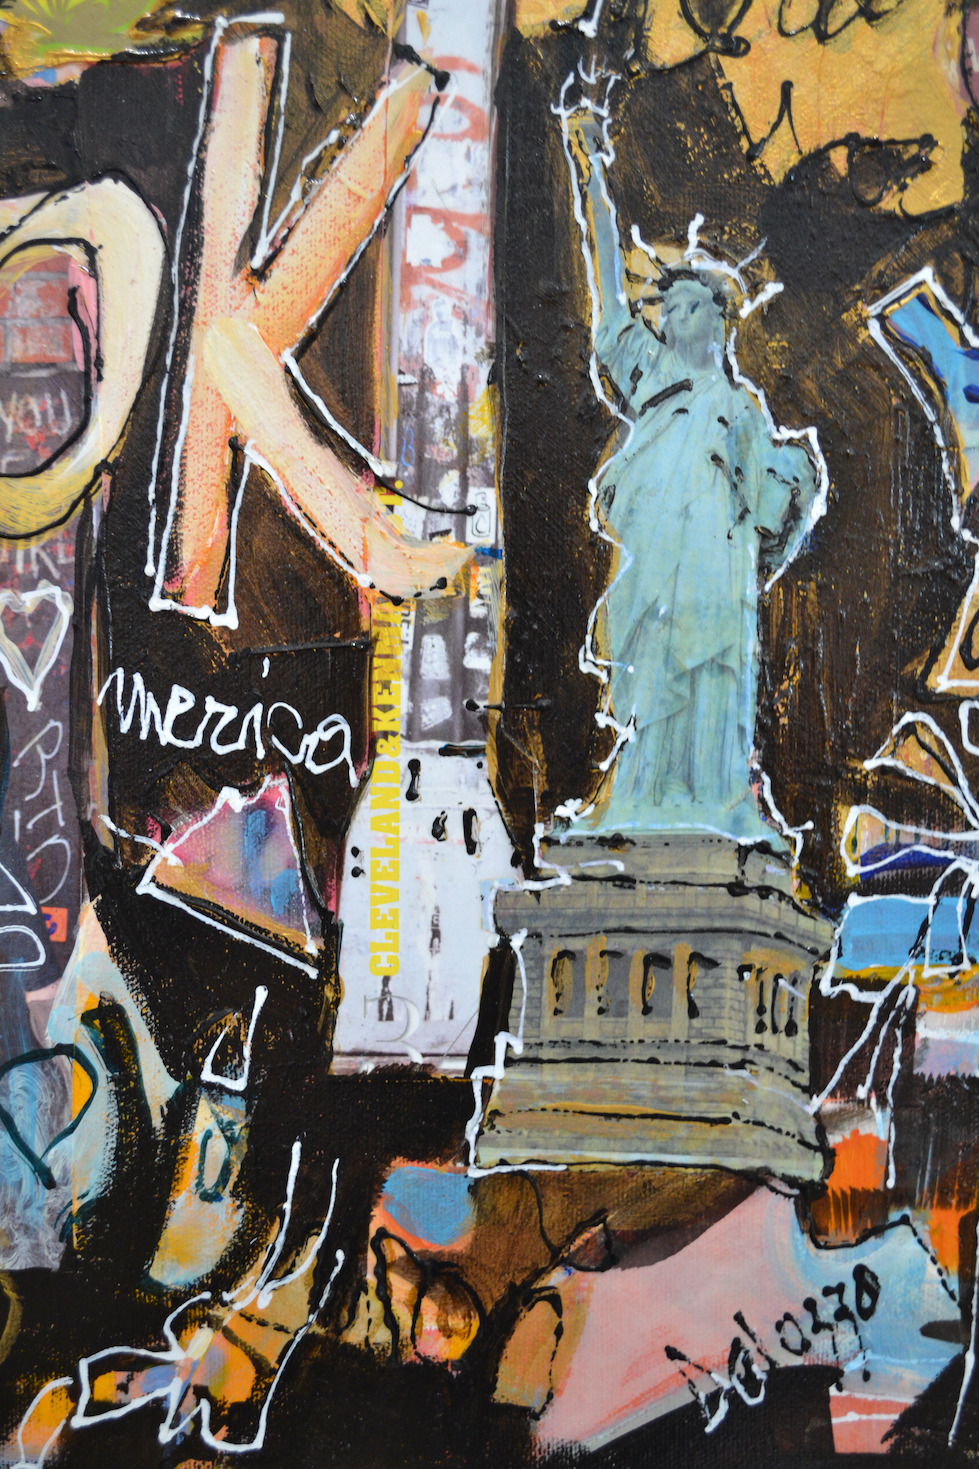 Close Up Detail Of Acrylic And Collage Painting "My Time New York City" By Lucette Dalozzo